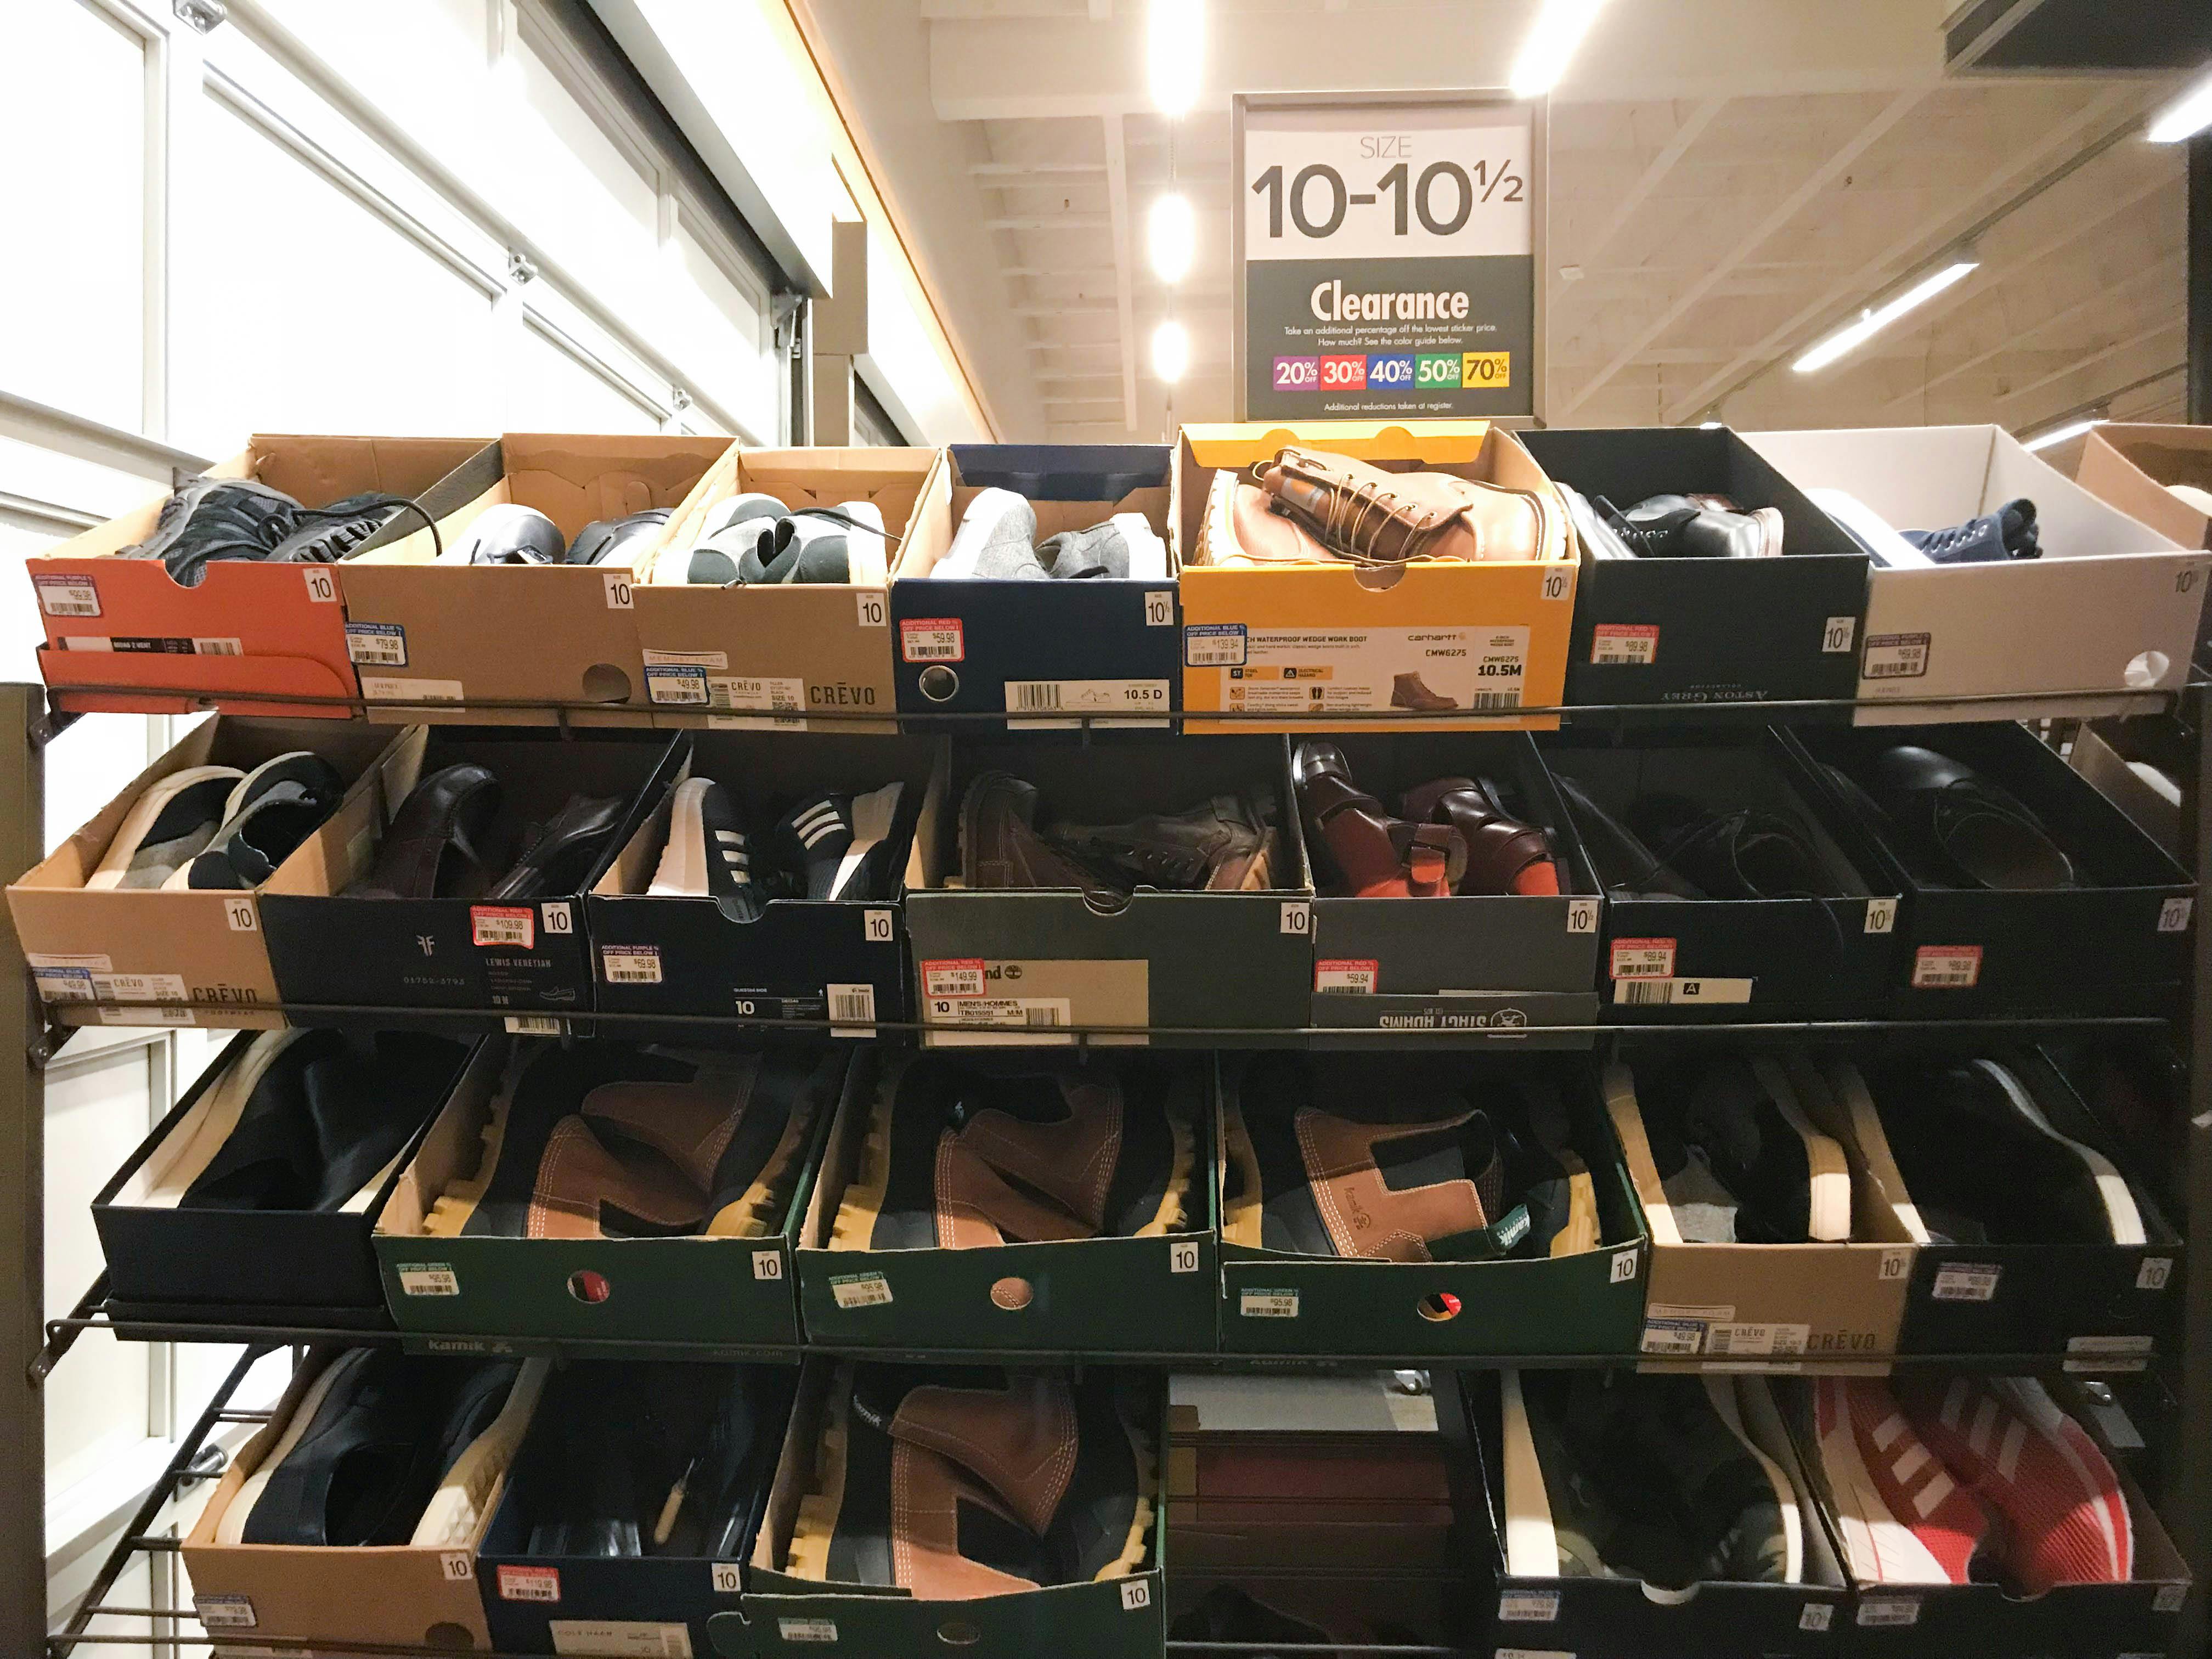 dsw womens clearance